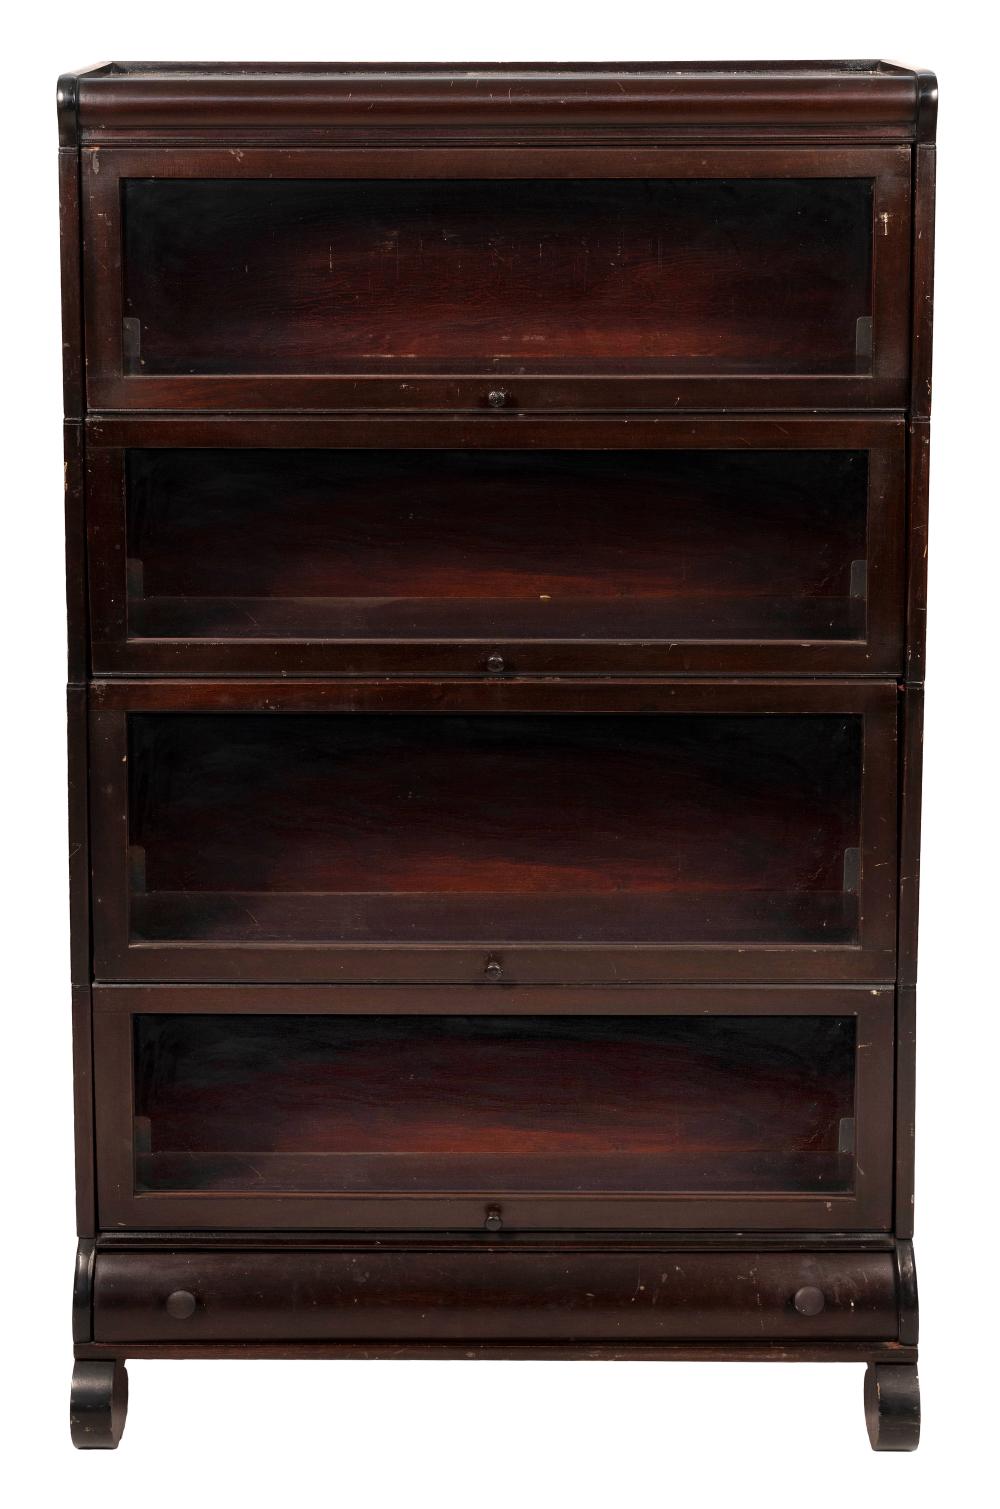 FOUR-SECTION BARRISTER'S BOOKCASE